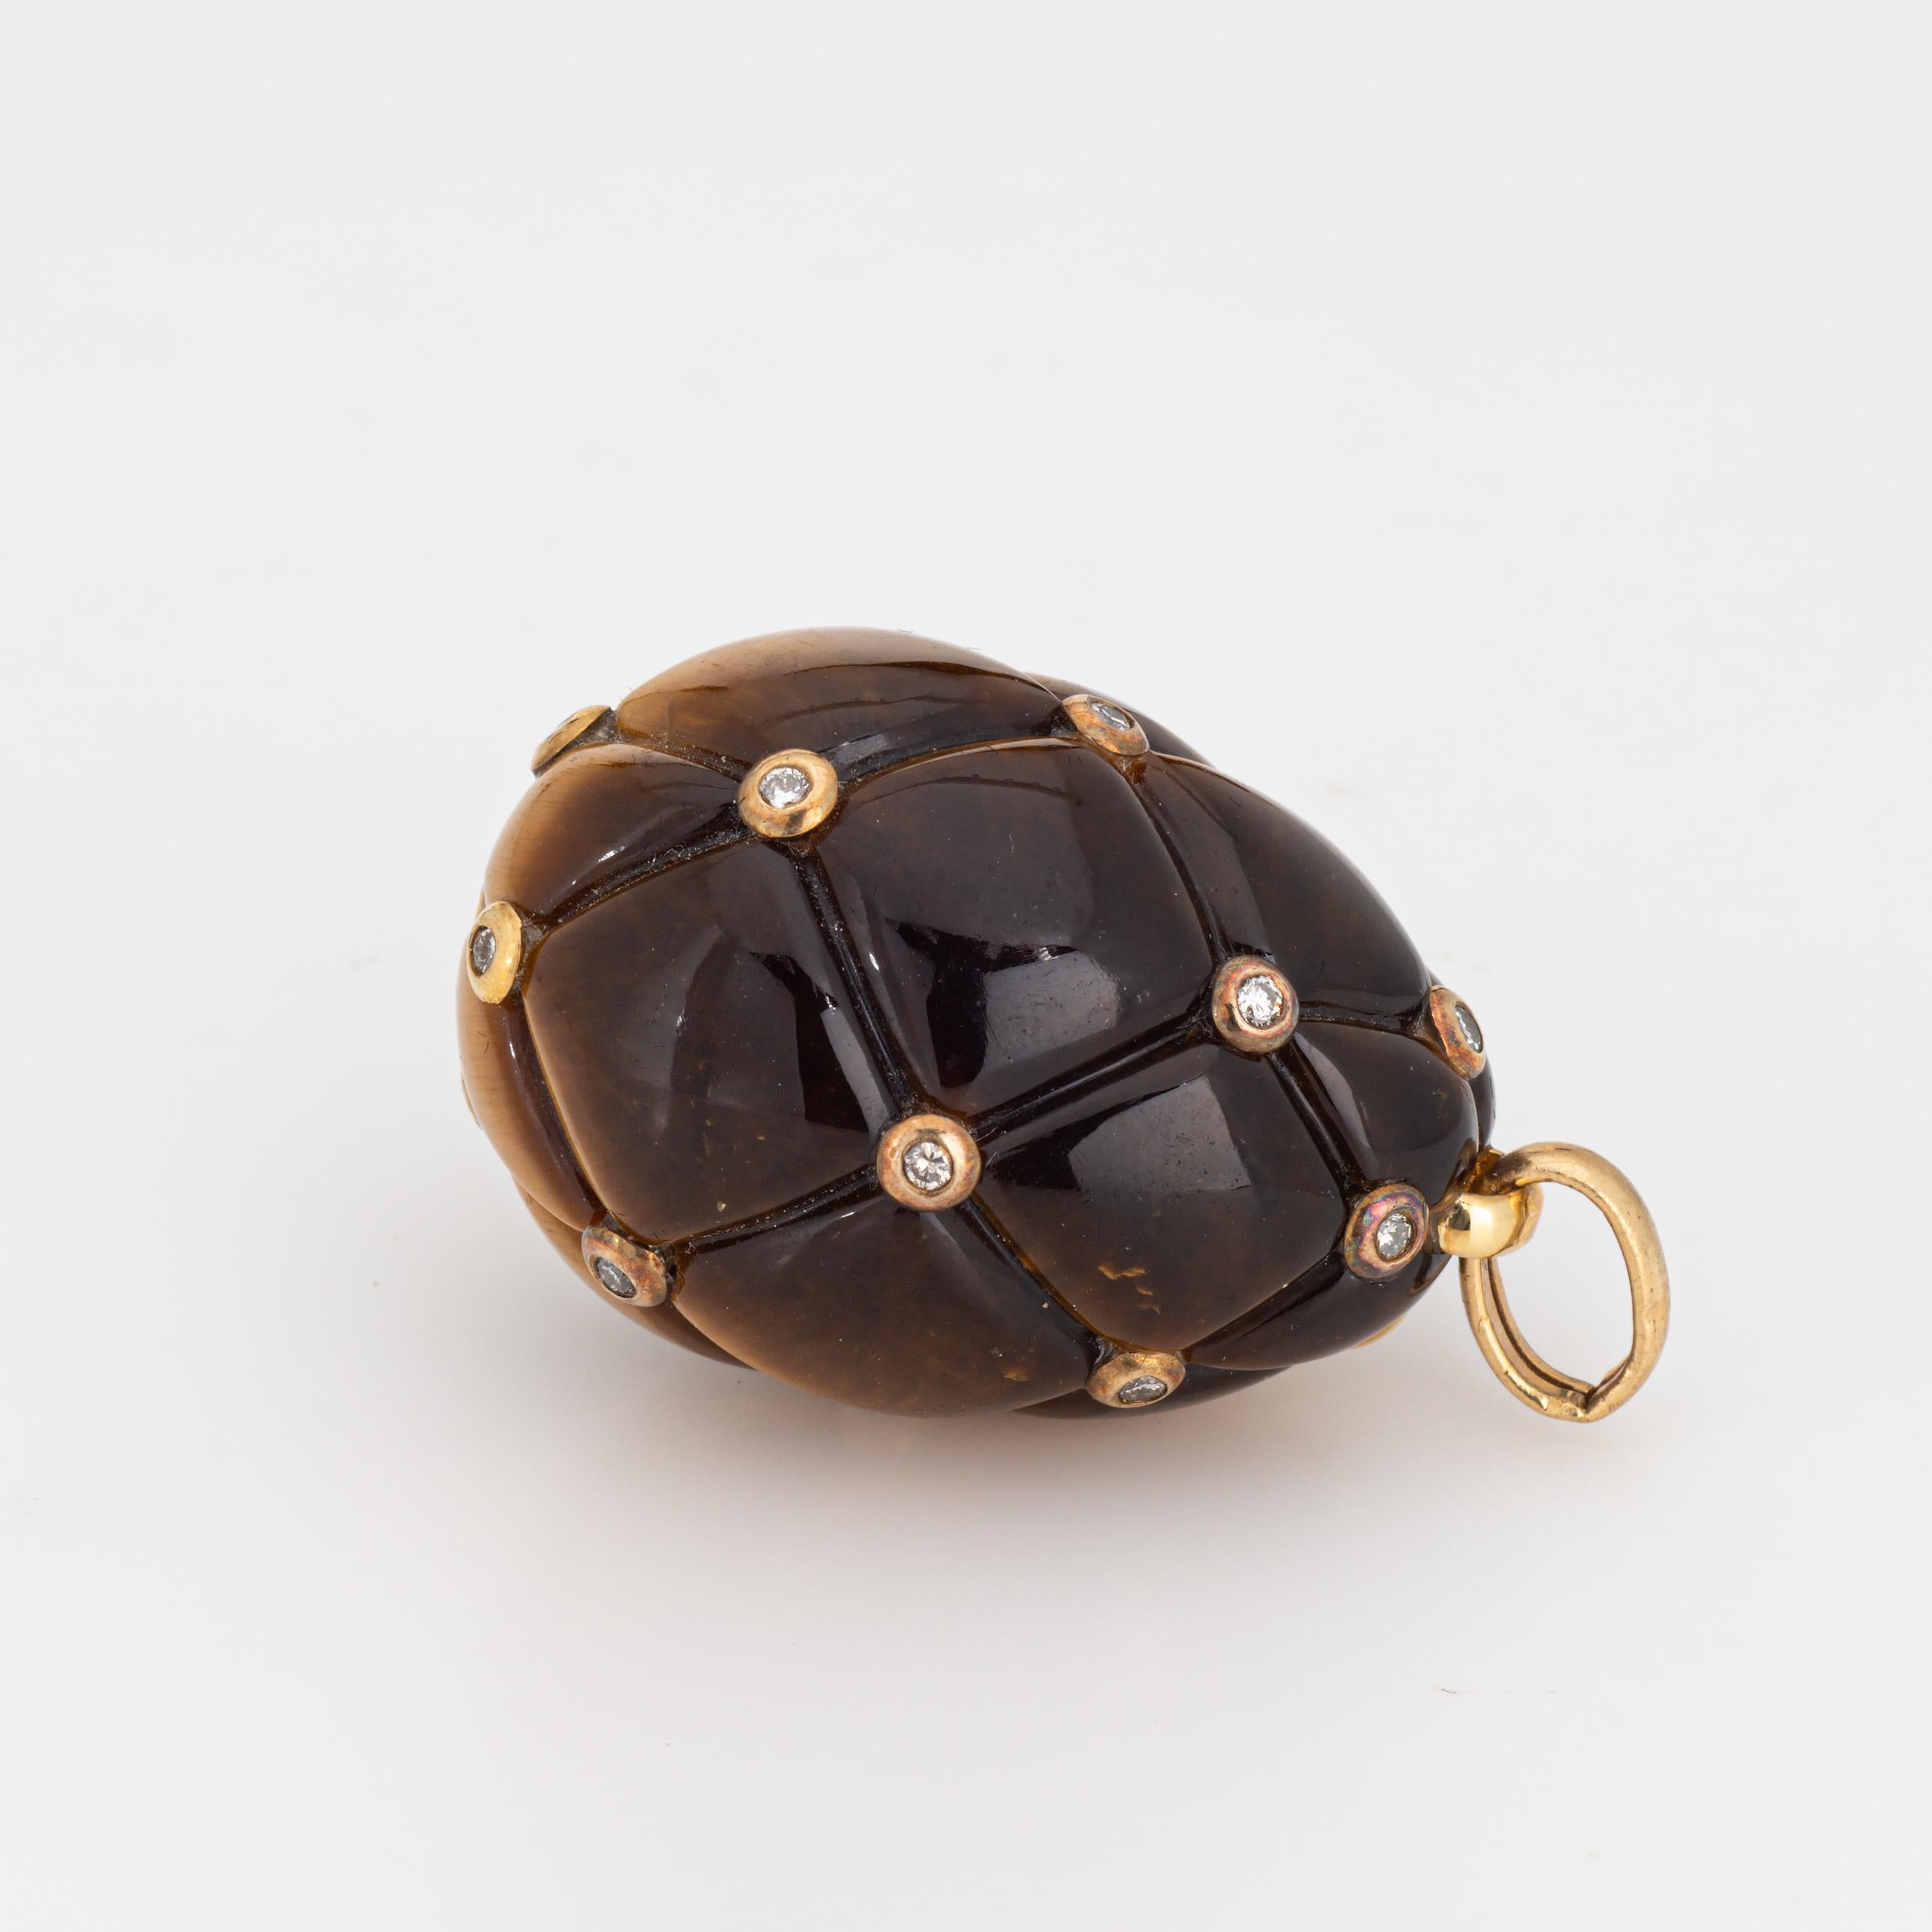 Tigers Eye Egg Pendant Diamond Estate 18k Yellow Gold Large Charm Fine Jewelry  In Good Condition For Sale In Torrance, CA